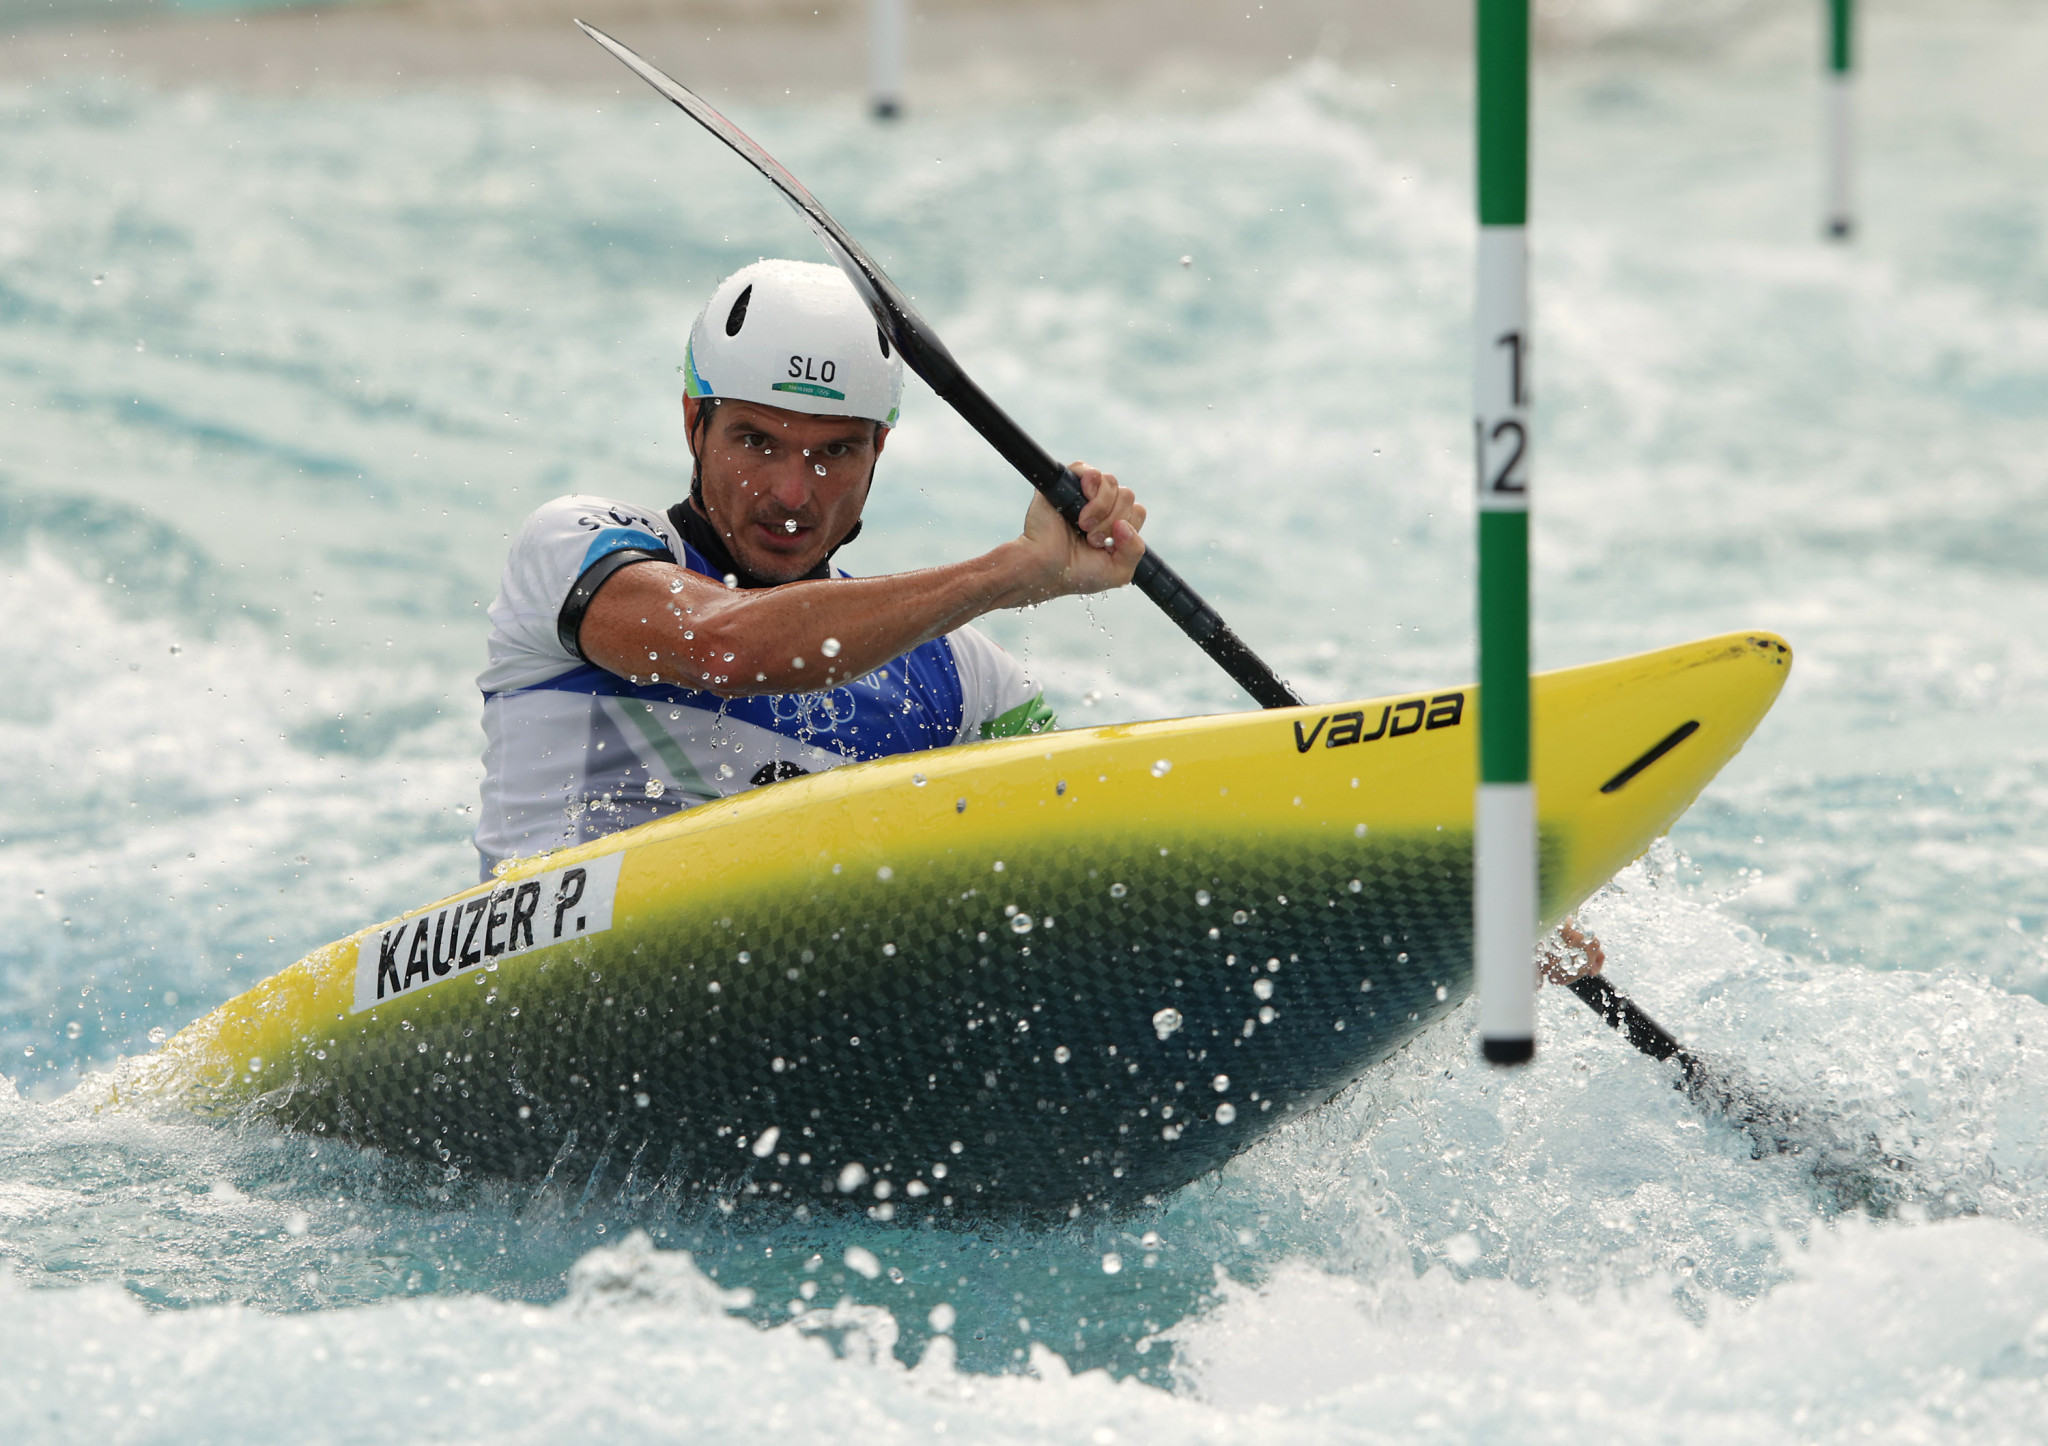 Slovenia's Peter Kauzer clinched his first Canoe Slalom World Cup victory for four years in Prague ©Getty Images